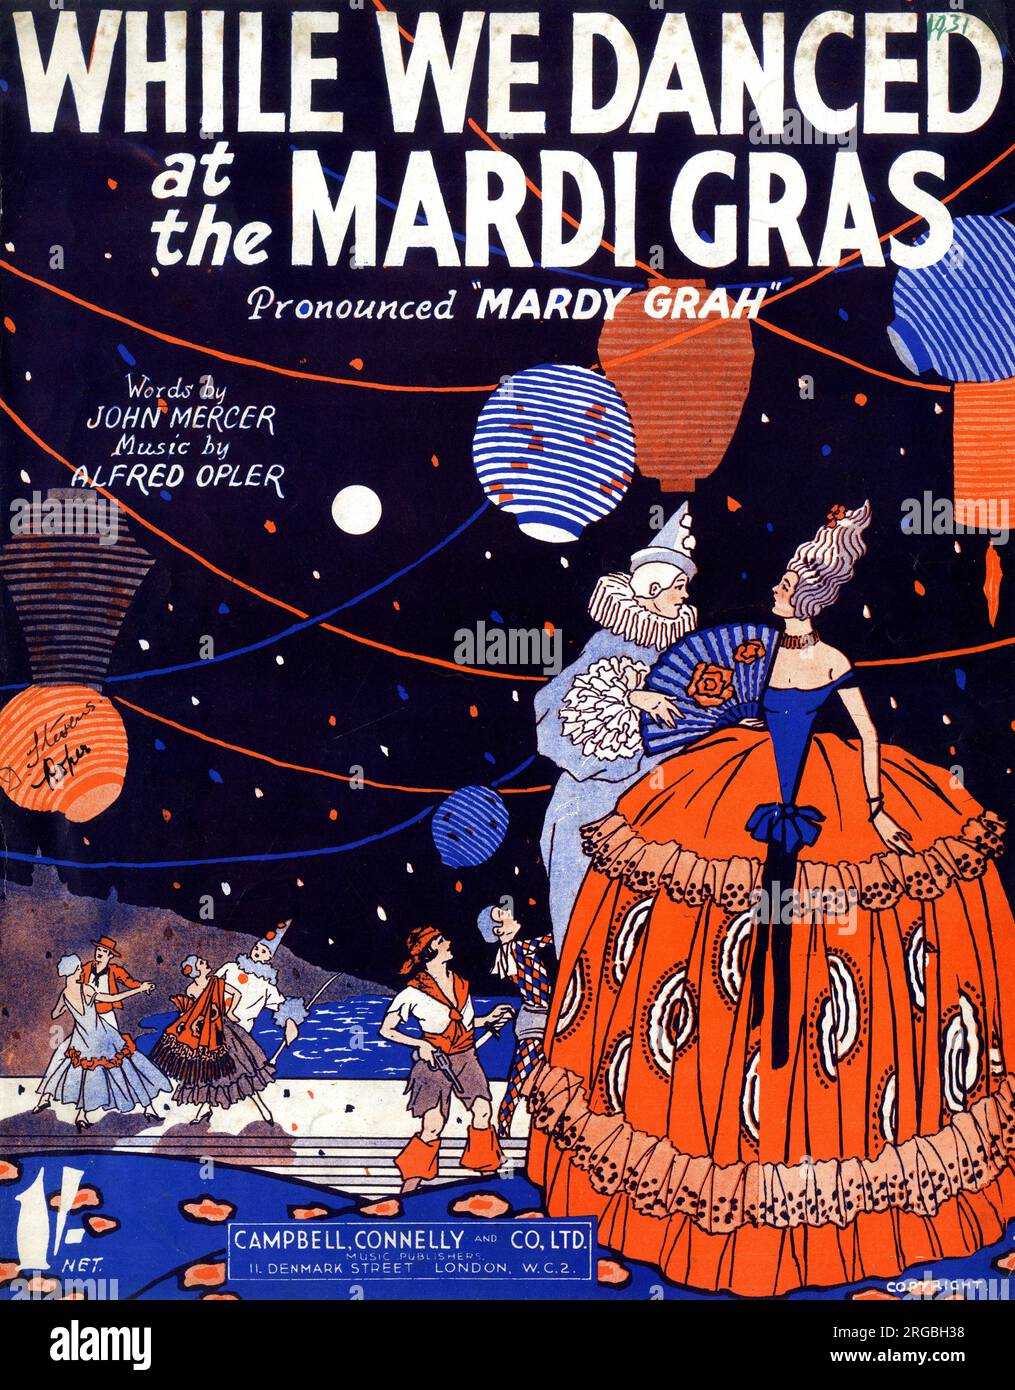 Music cover, While We Danced at the Mardi Gras, words by John Mercer, music by Alfred Opler. Stock Photo